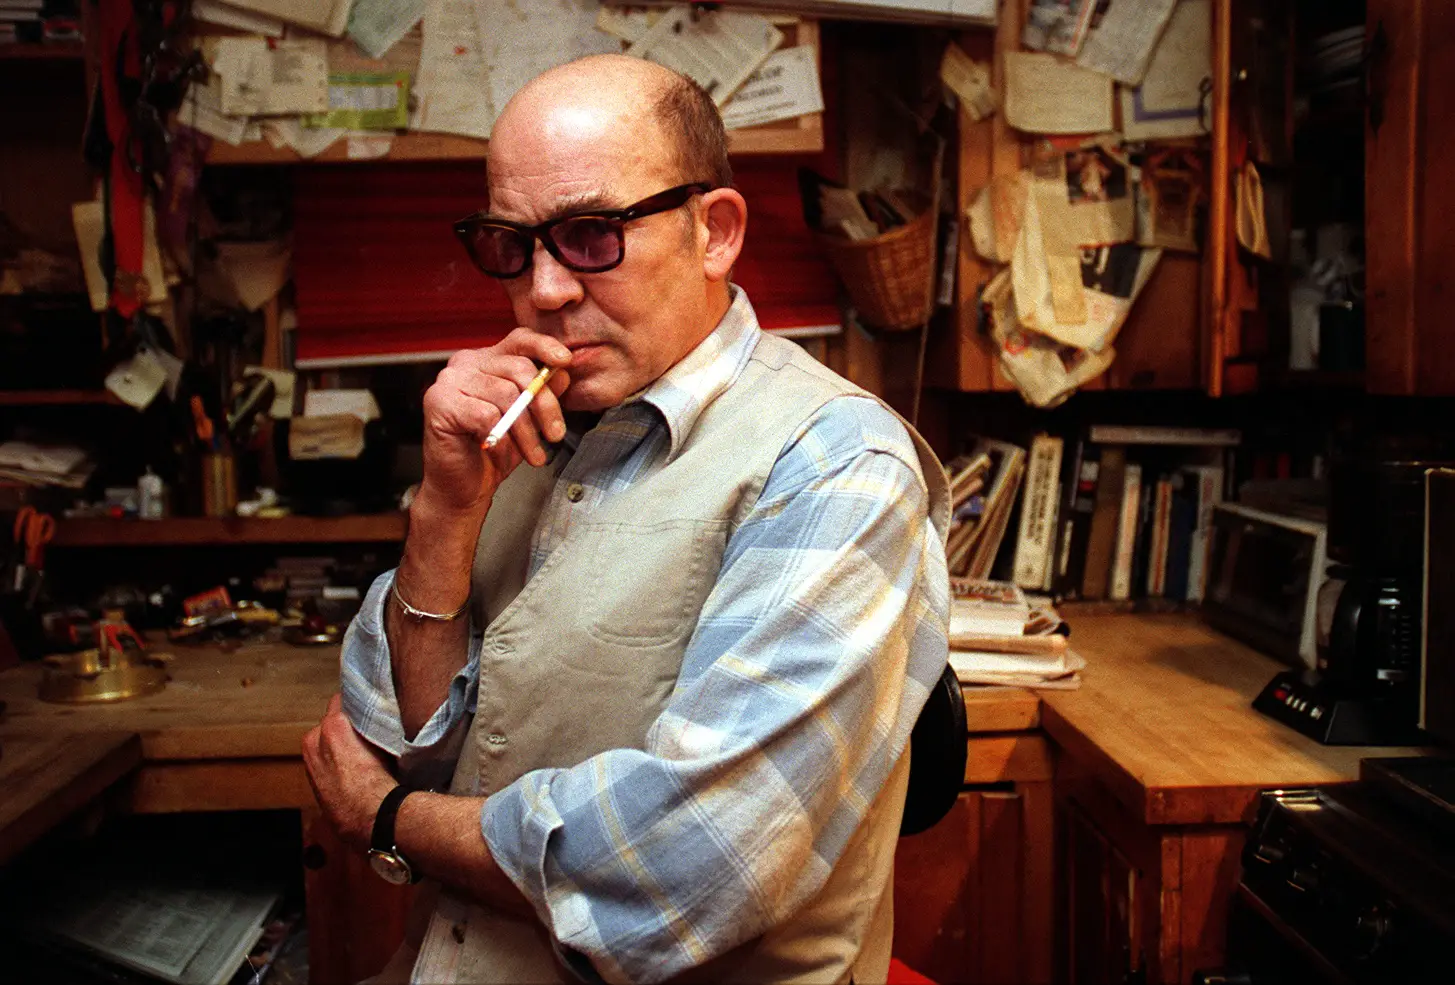 25 Hunter S Thompson Quotes About Life & Work